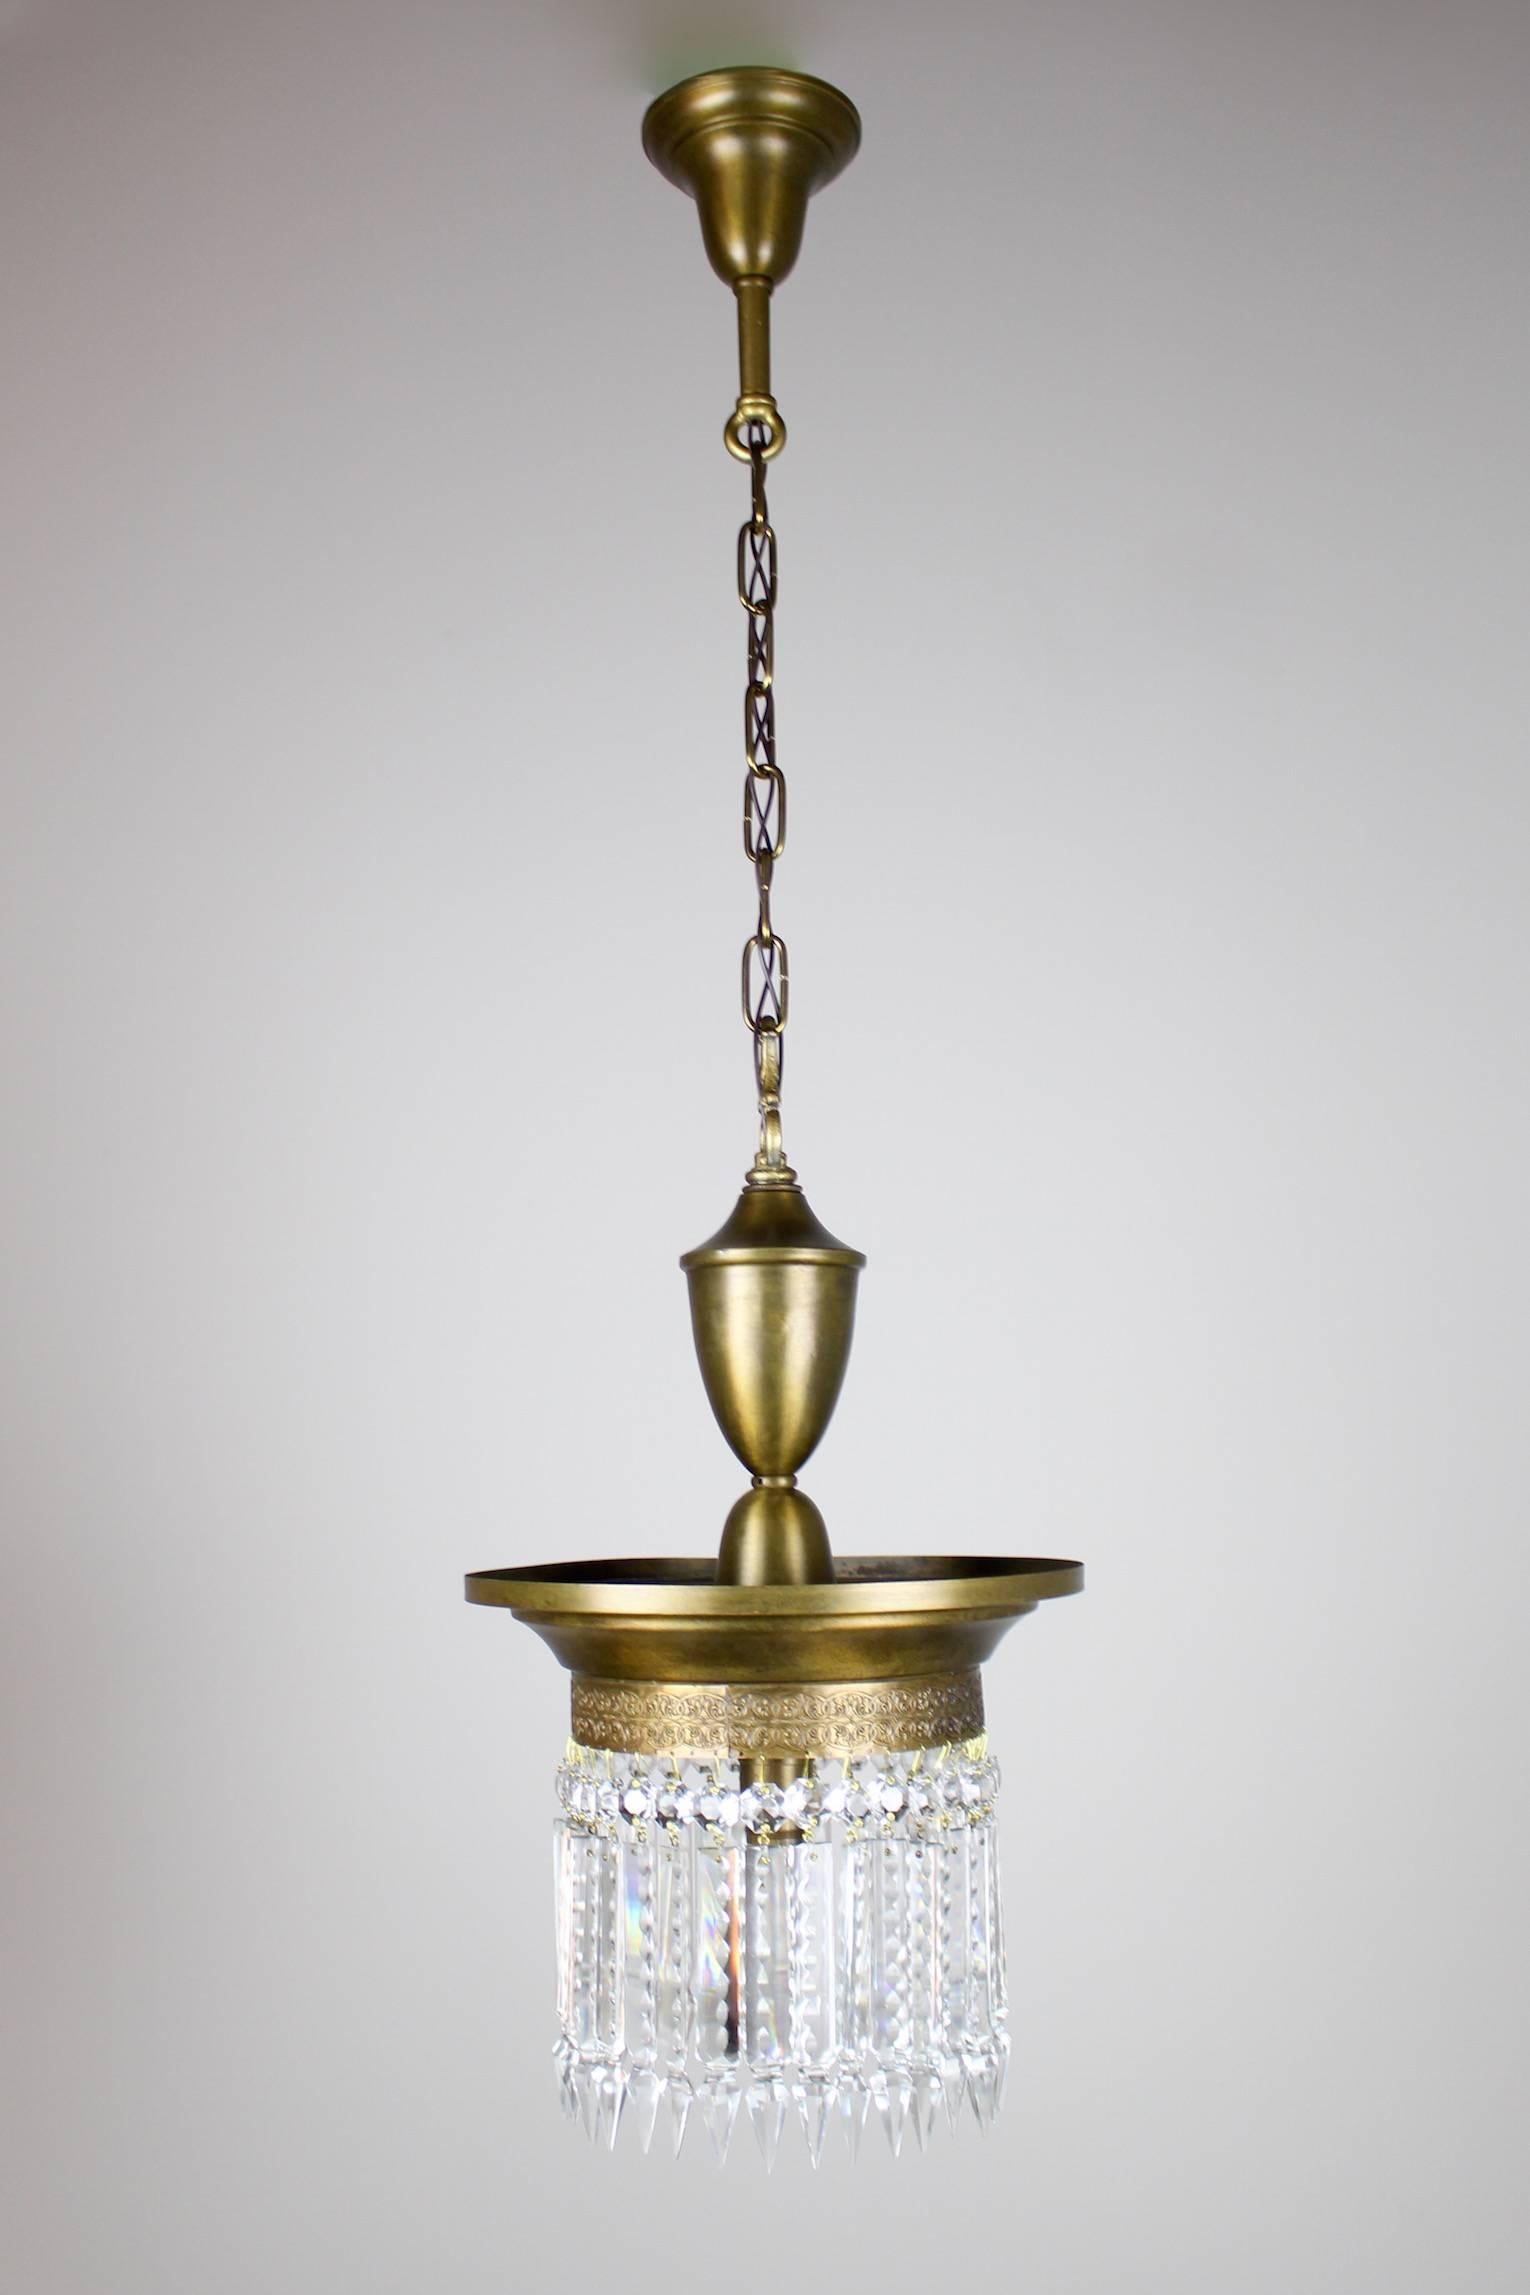 Edwardian style single pendant with notched crystal, sourced in buffalo, New York, circa 1920. Restored, rewired and ready to hang this light makes a lovely addition to a bedroom, hallway - or anywhere needing a hearty glow. SKU DF1254.